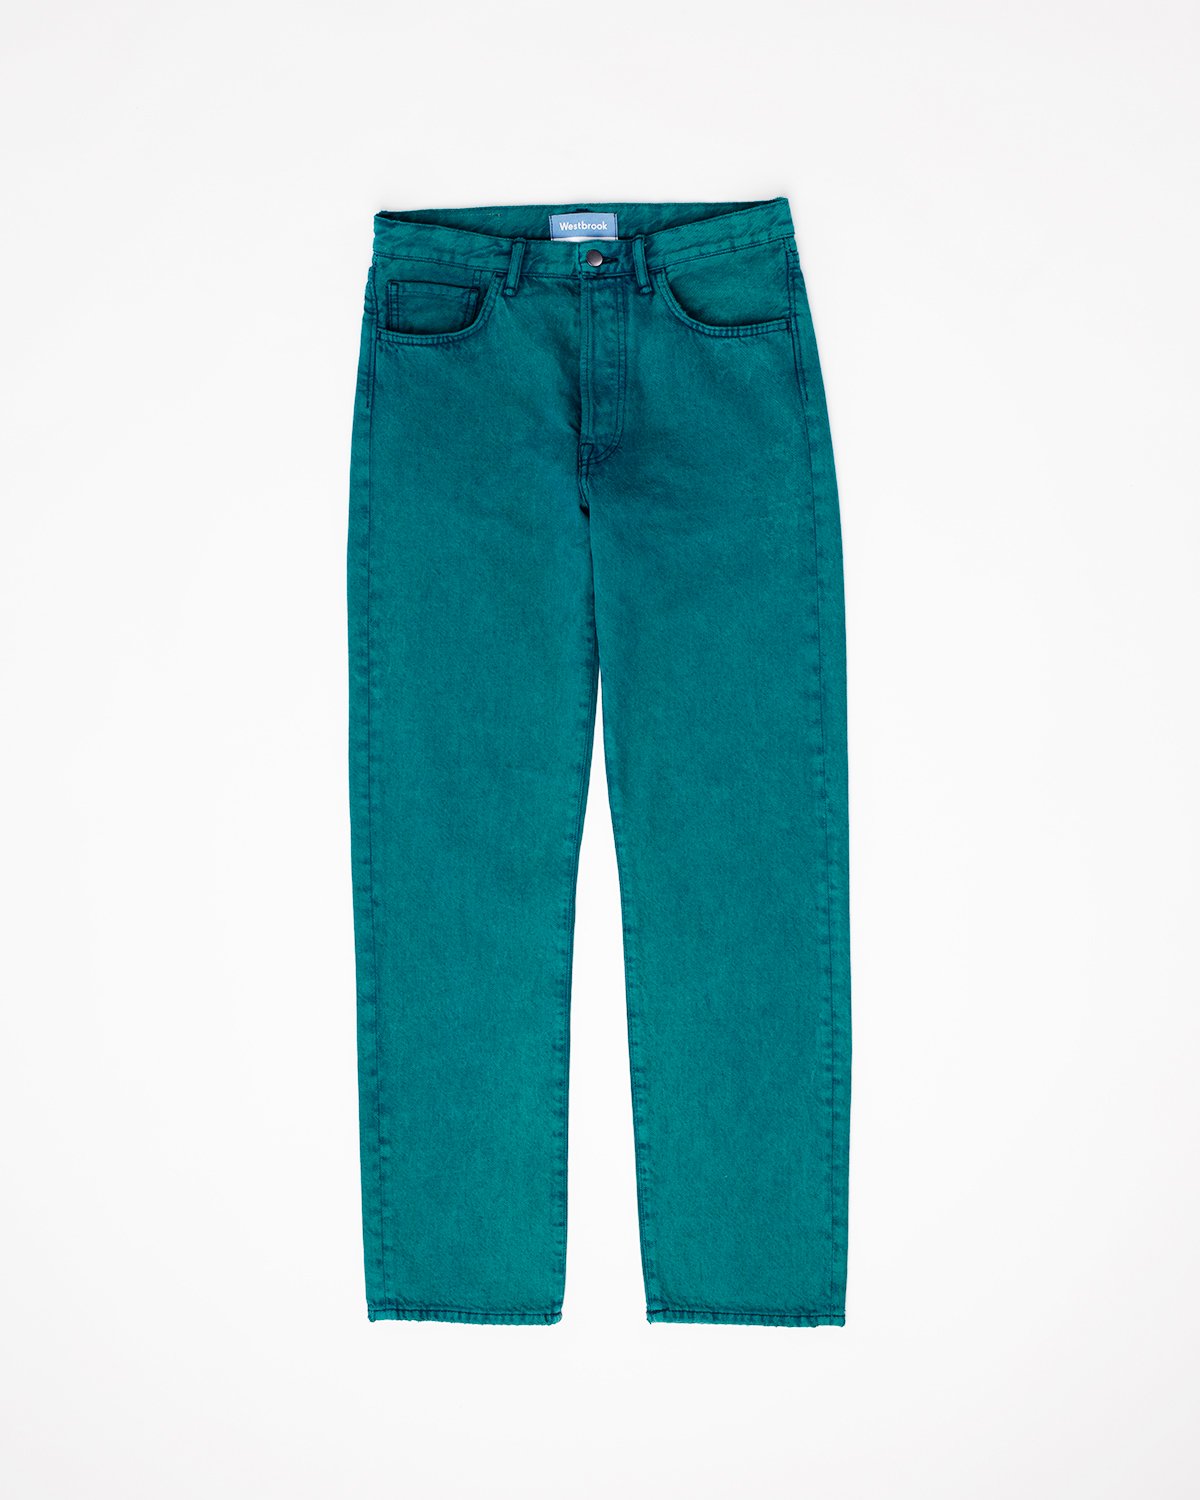 Acne Studios - Overdyed Jeans Jade Green - Clothing - Green - Image 1